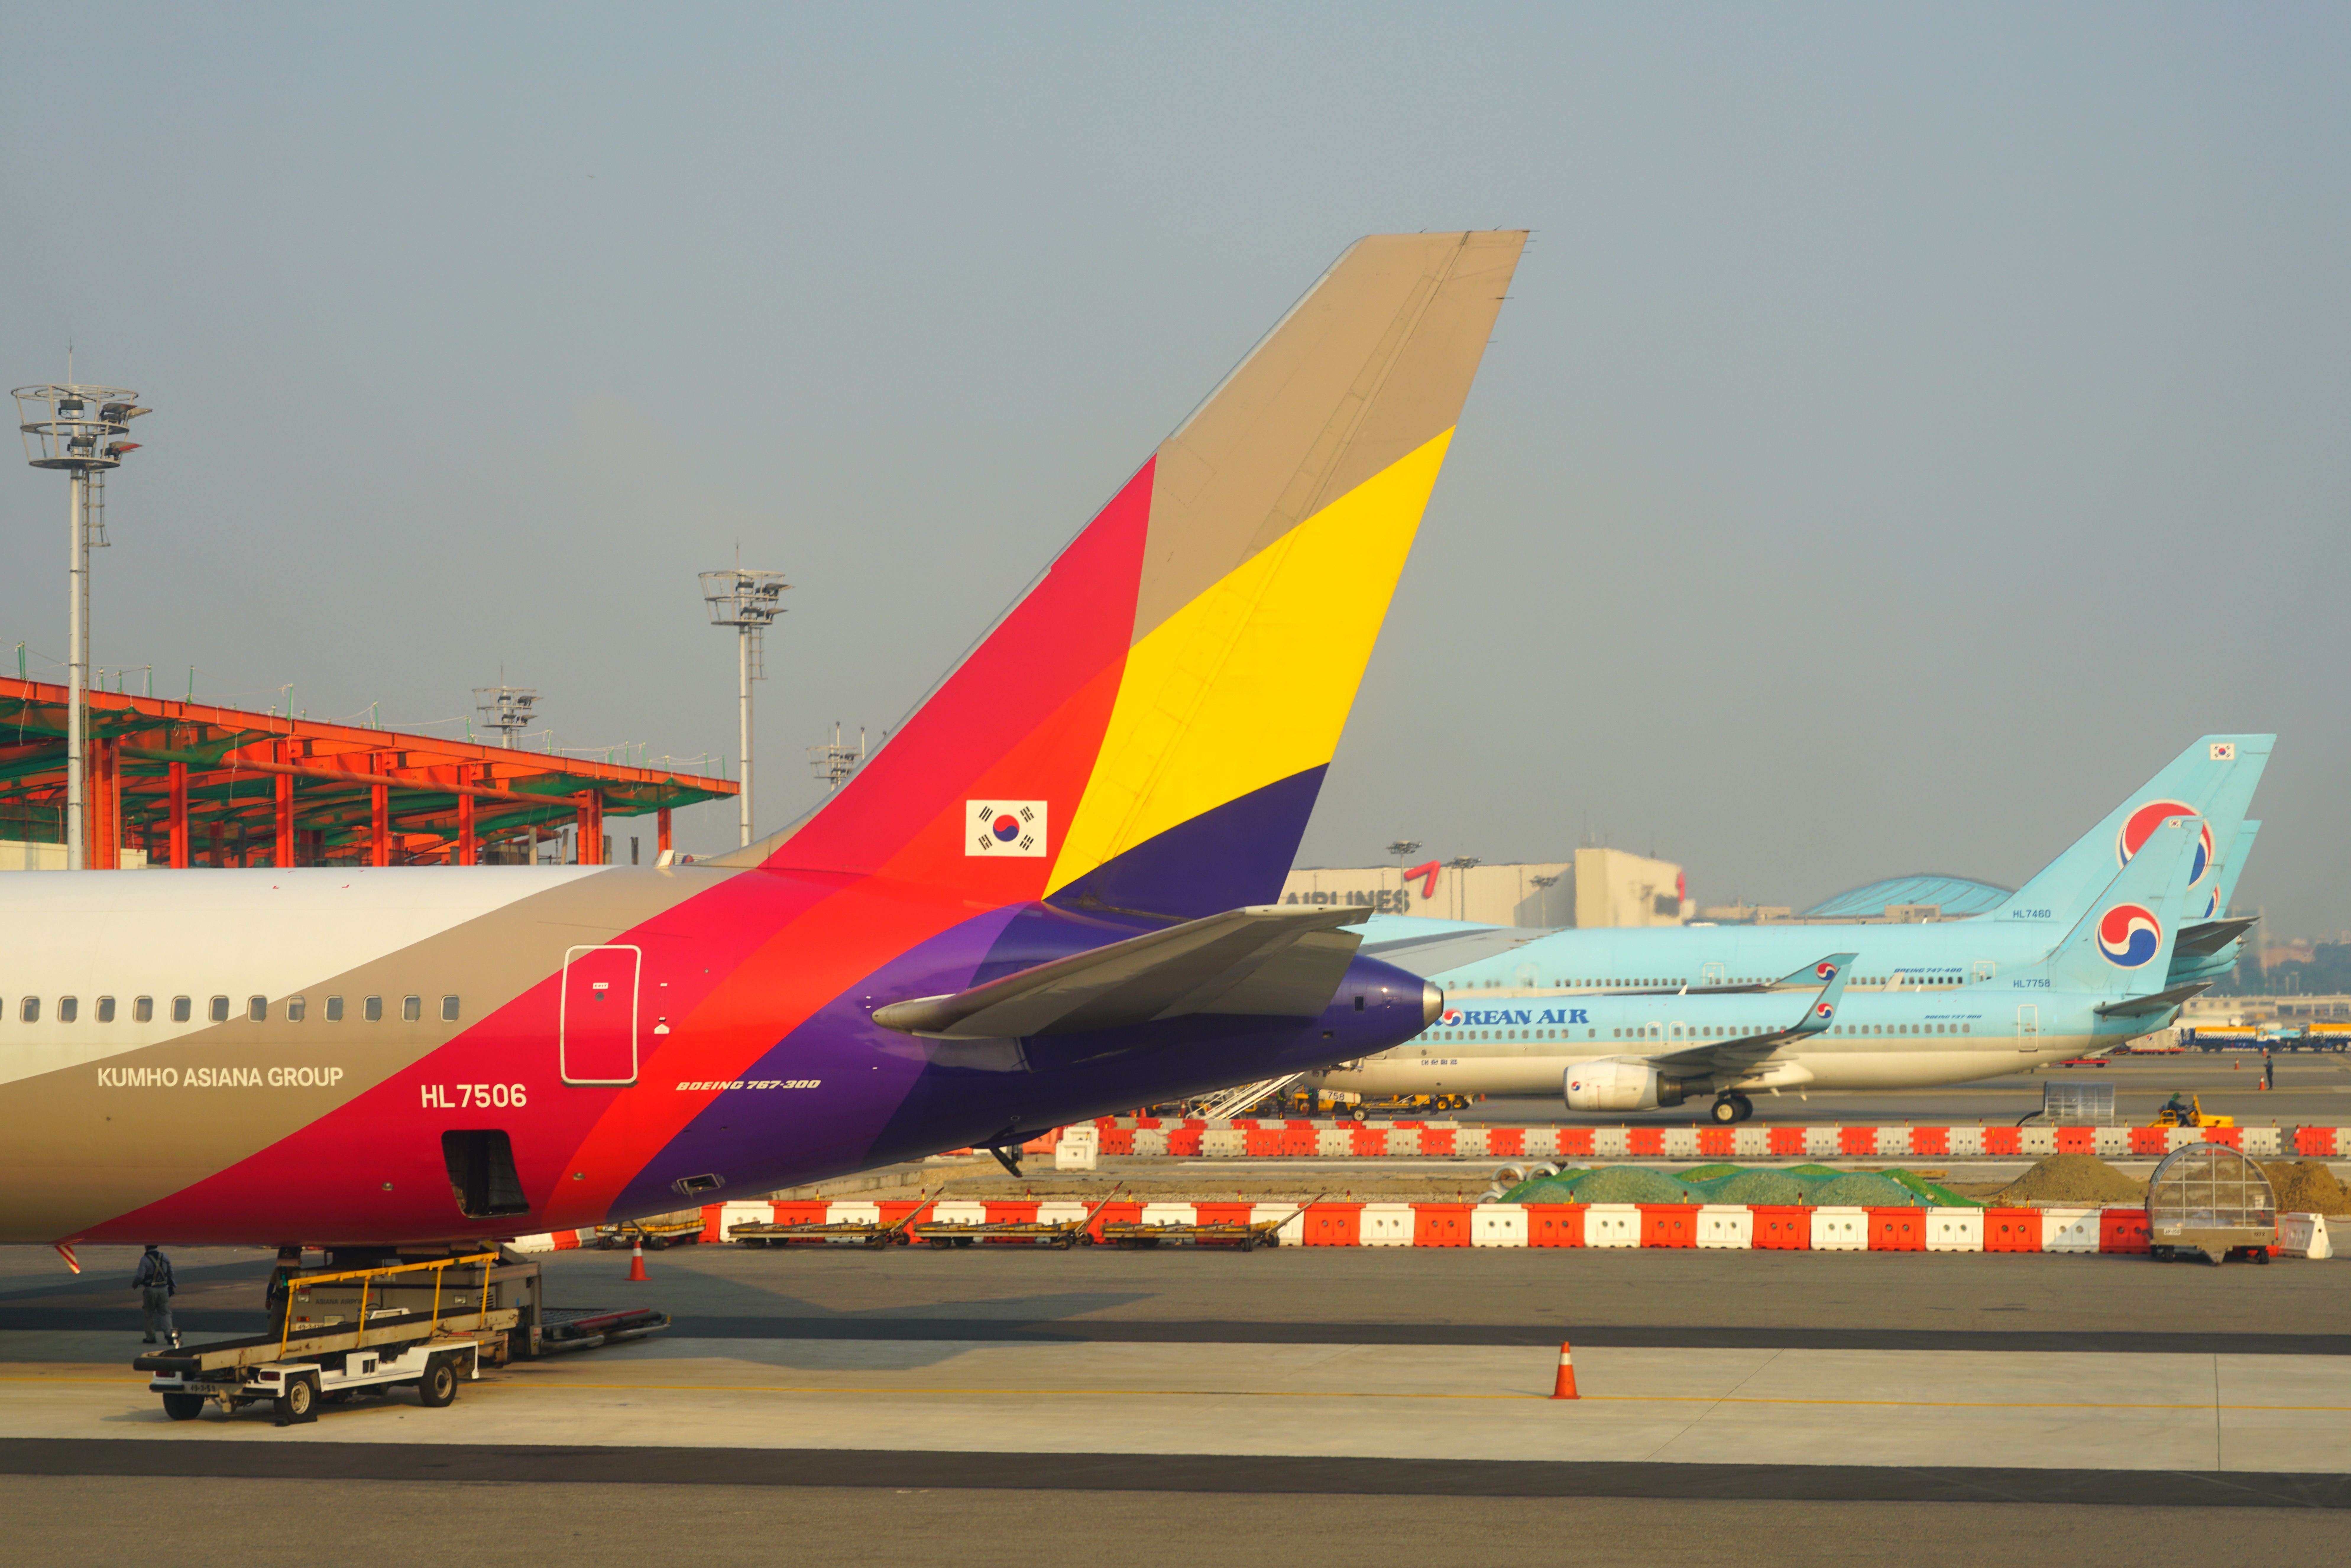 Tails of an Asiana Airlines aircraft (front) and a Korean Air aircraft (back) 